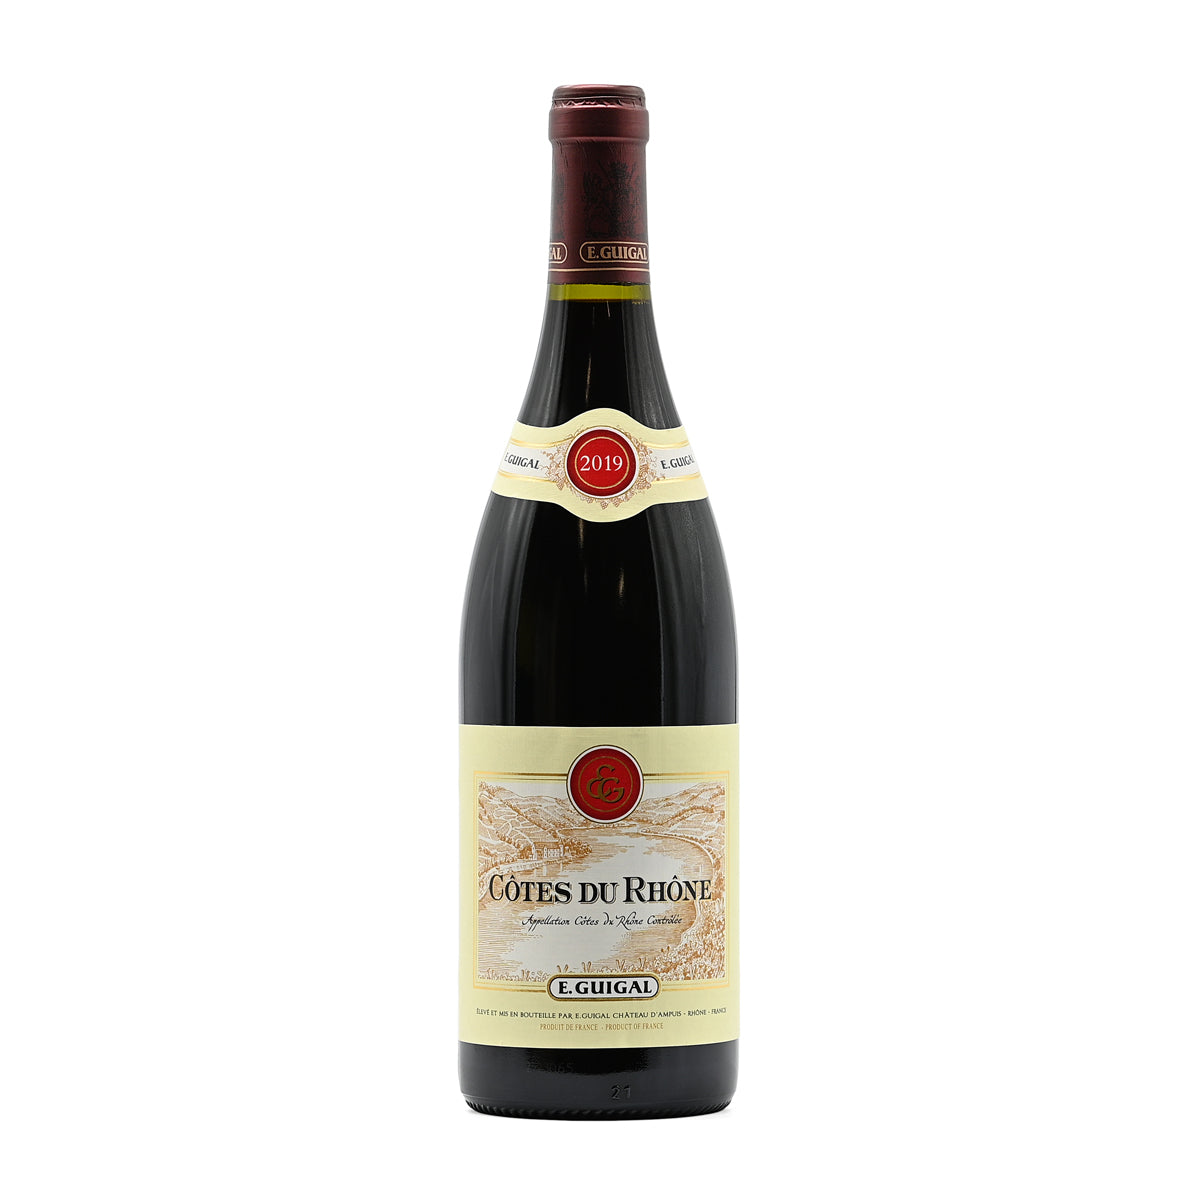 E. Guigal Cotes du Rhone Rouge 2019, 750ml French red wine, made from a blend of Syrah, Grenache, and Mourvèdre; from Côte du Rhône, Rhone Valley, France – GDV Fine Wines, Hong Kong